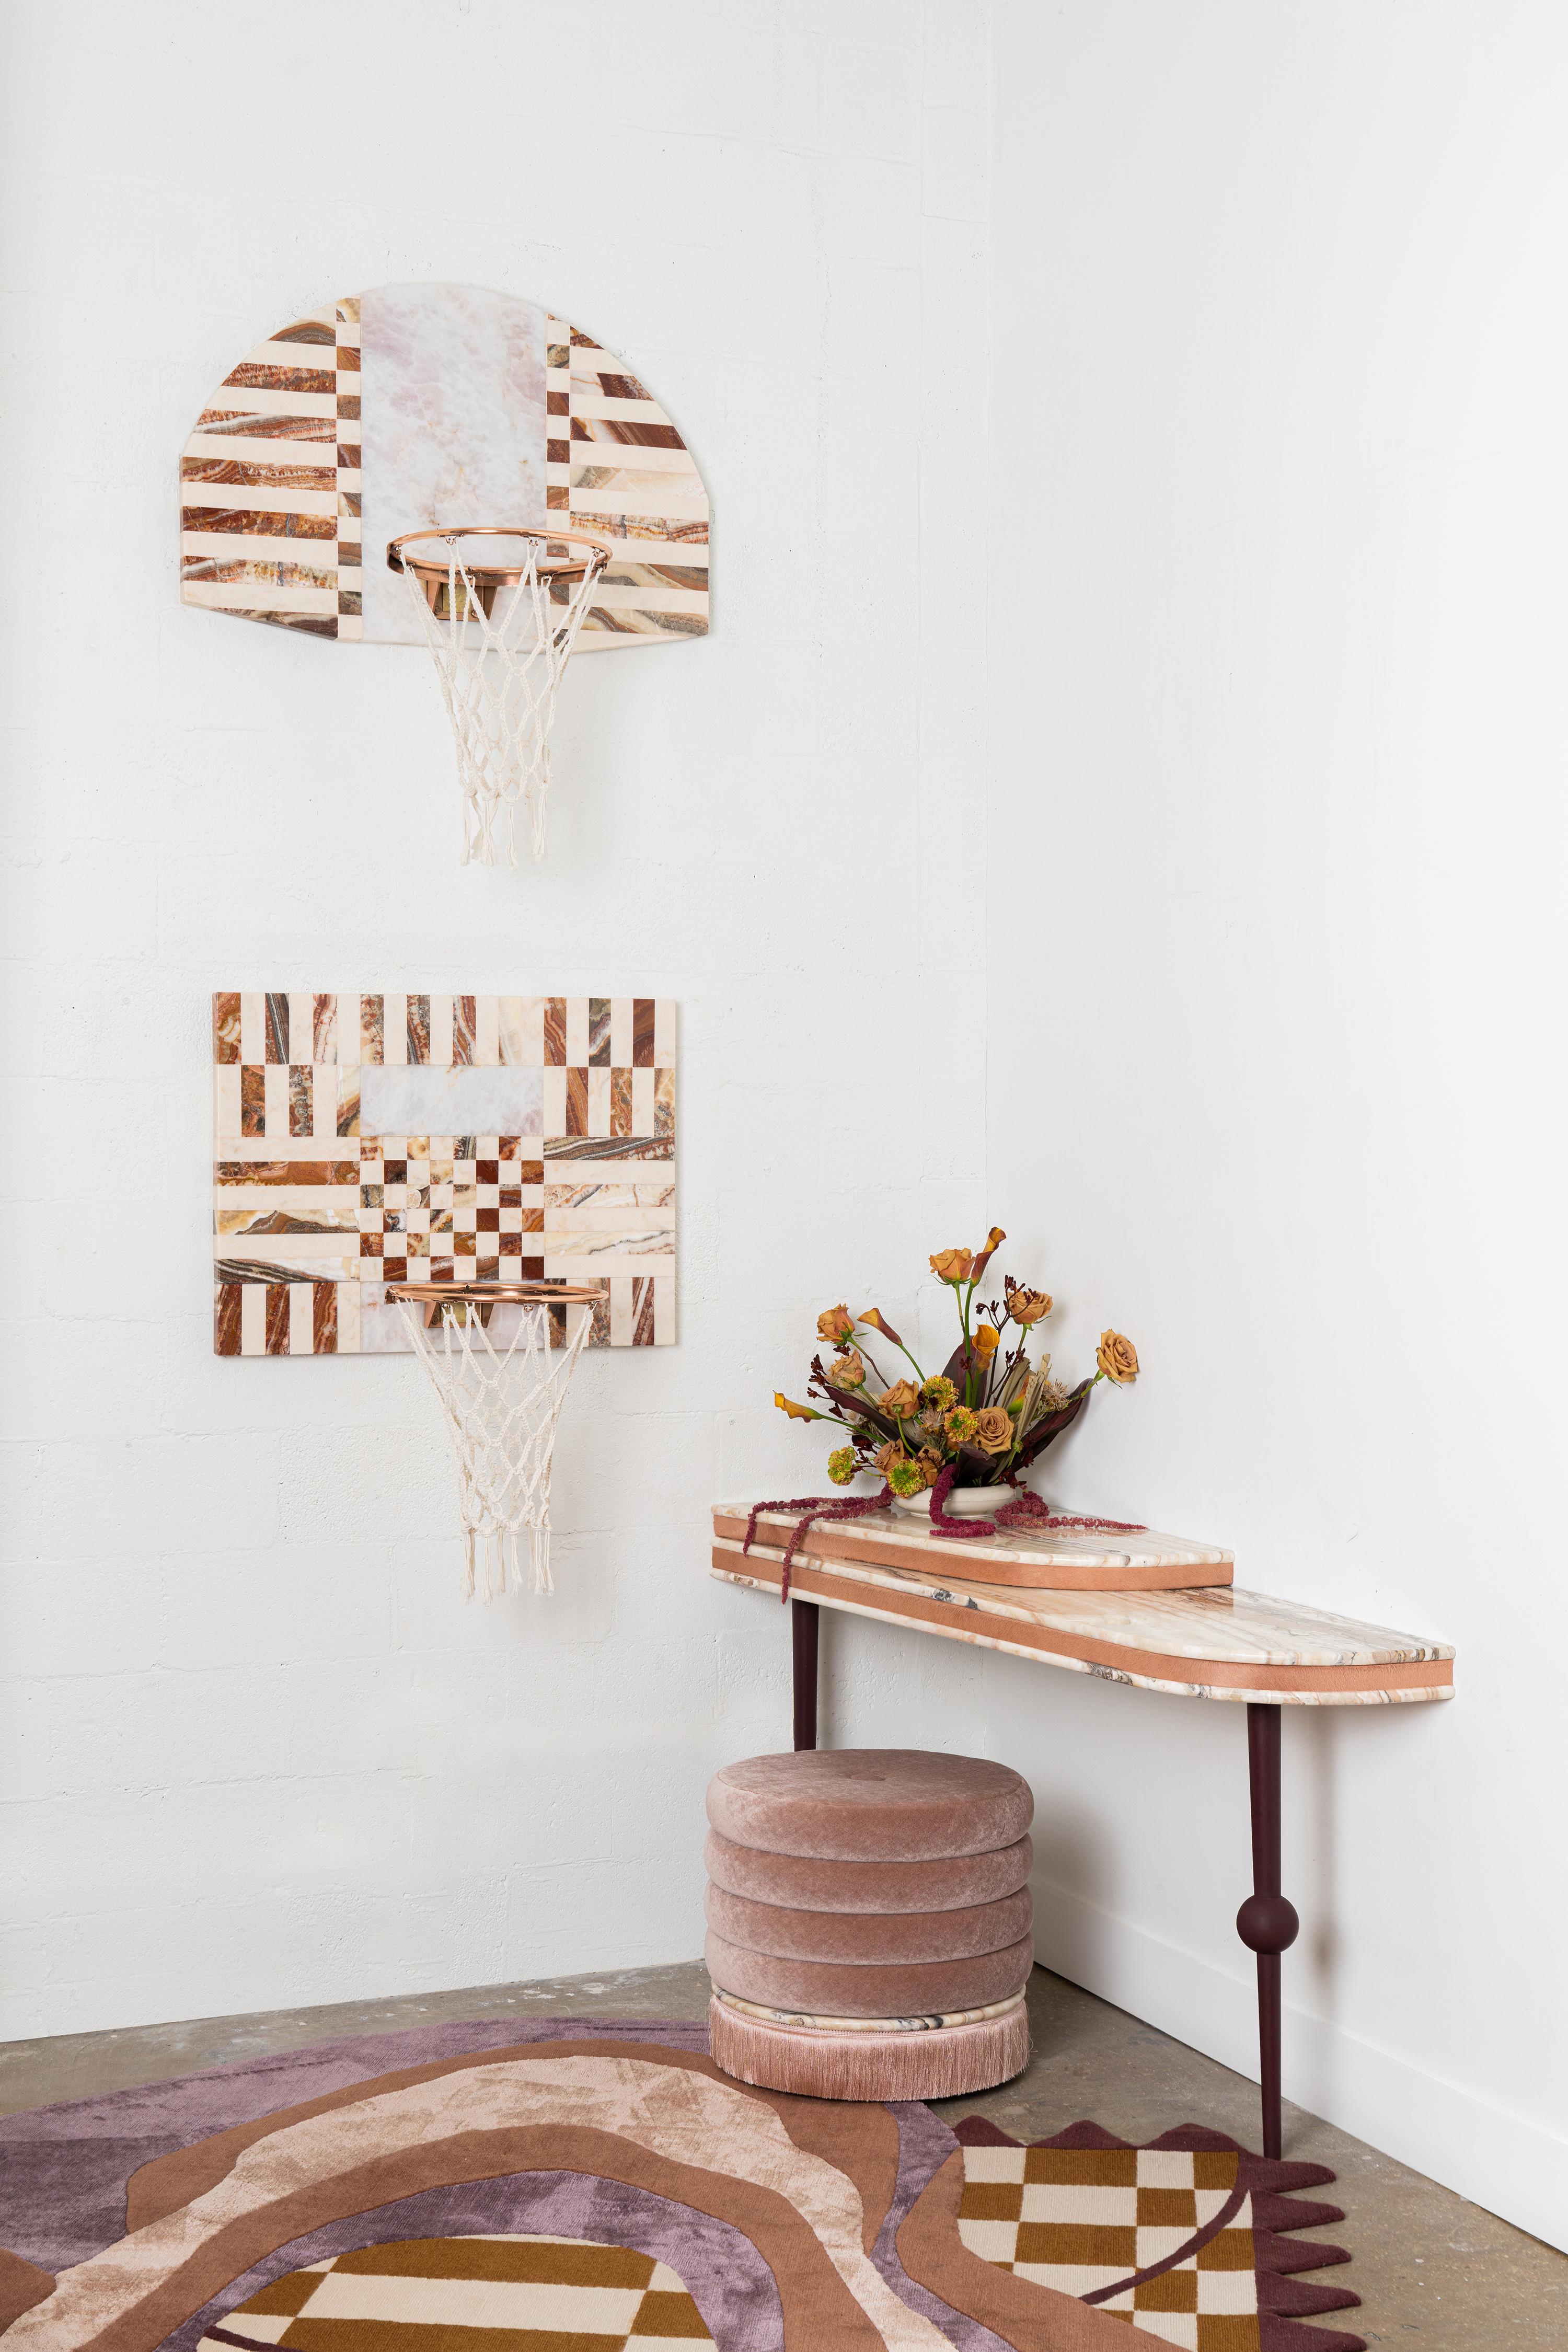 A playful and graphic layering of marble patterns that utmost depict the ALTIS aesthetics. Hues of blushes and burgundies are reflected amidst the marbles, hand-woven cotton and copper that comprise the perfect union of materiality. This